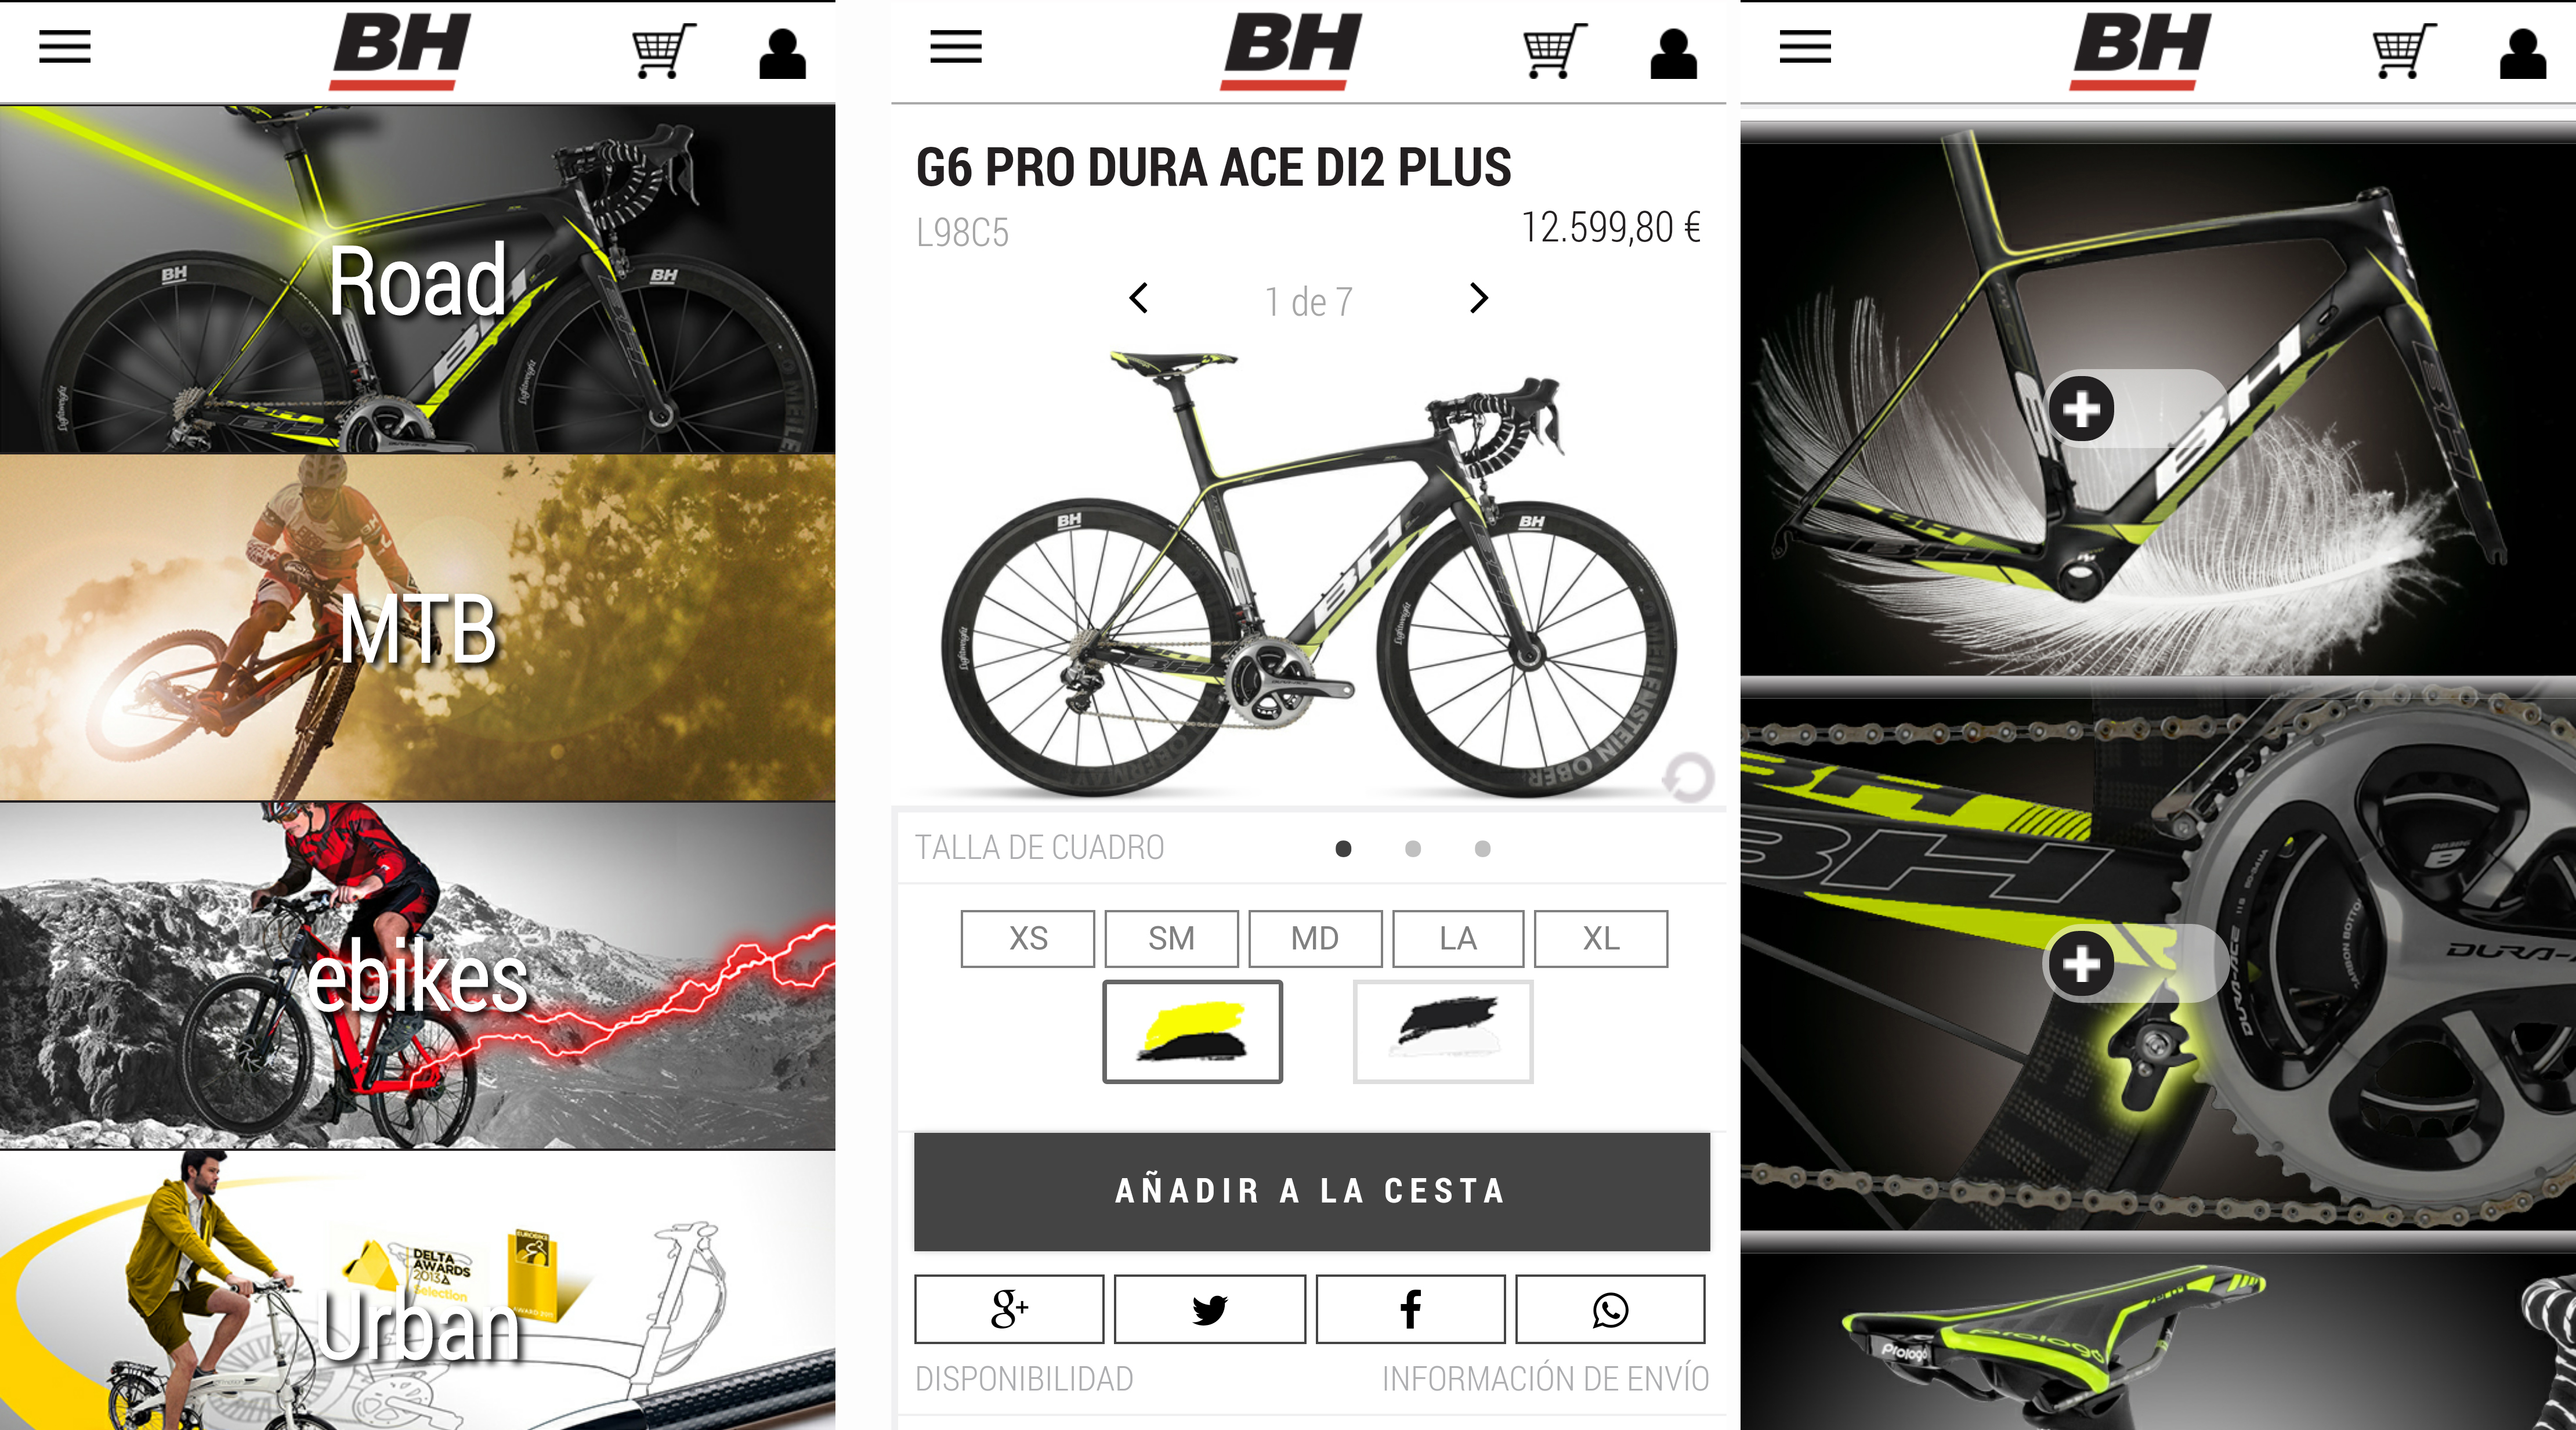 BHBIKES.COM launches its mobile version